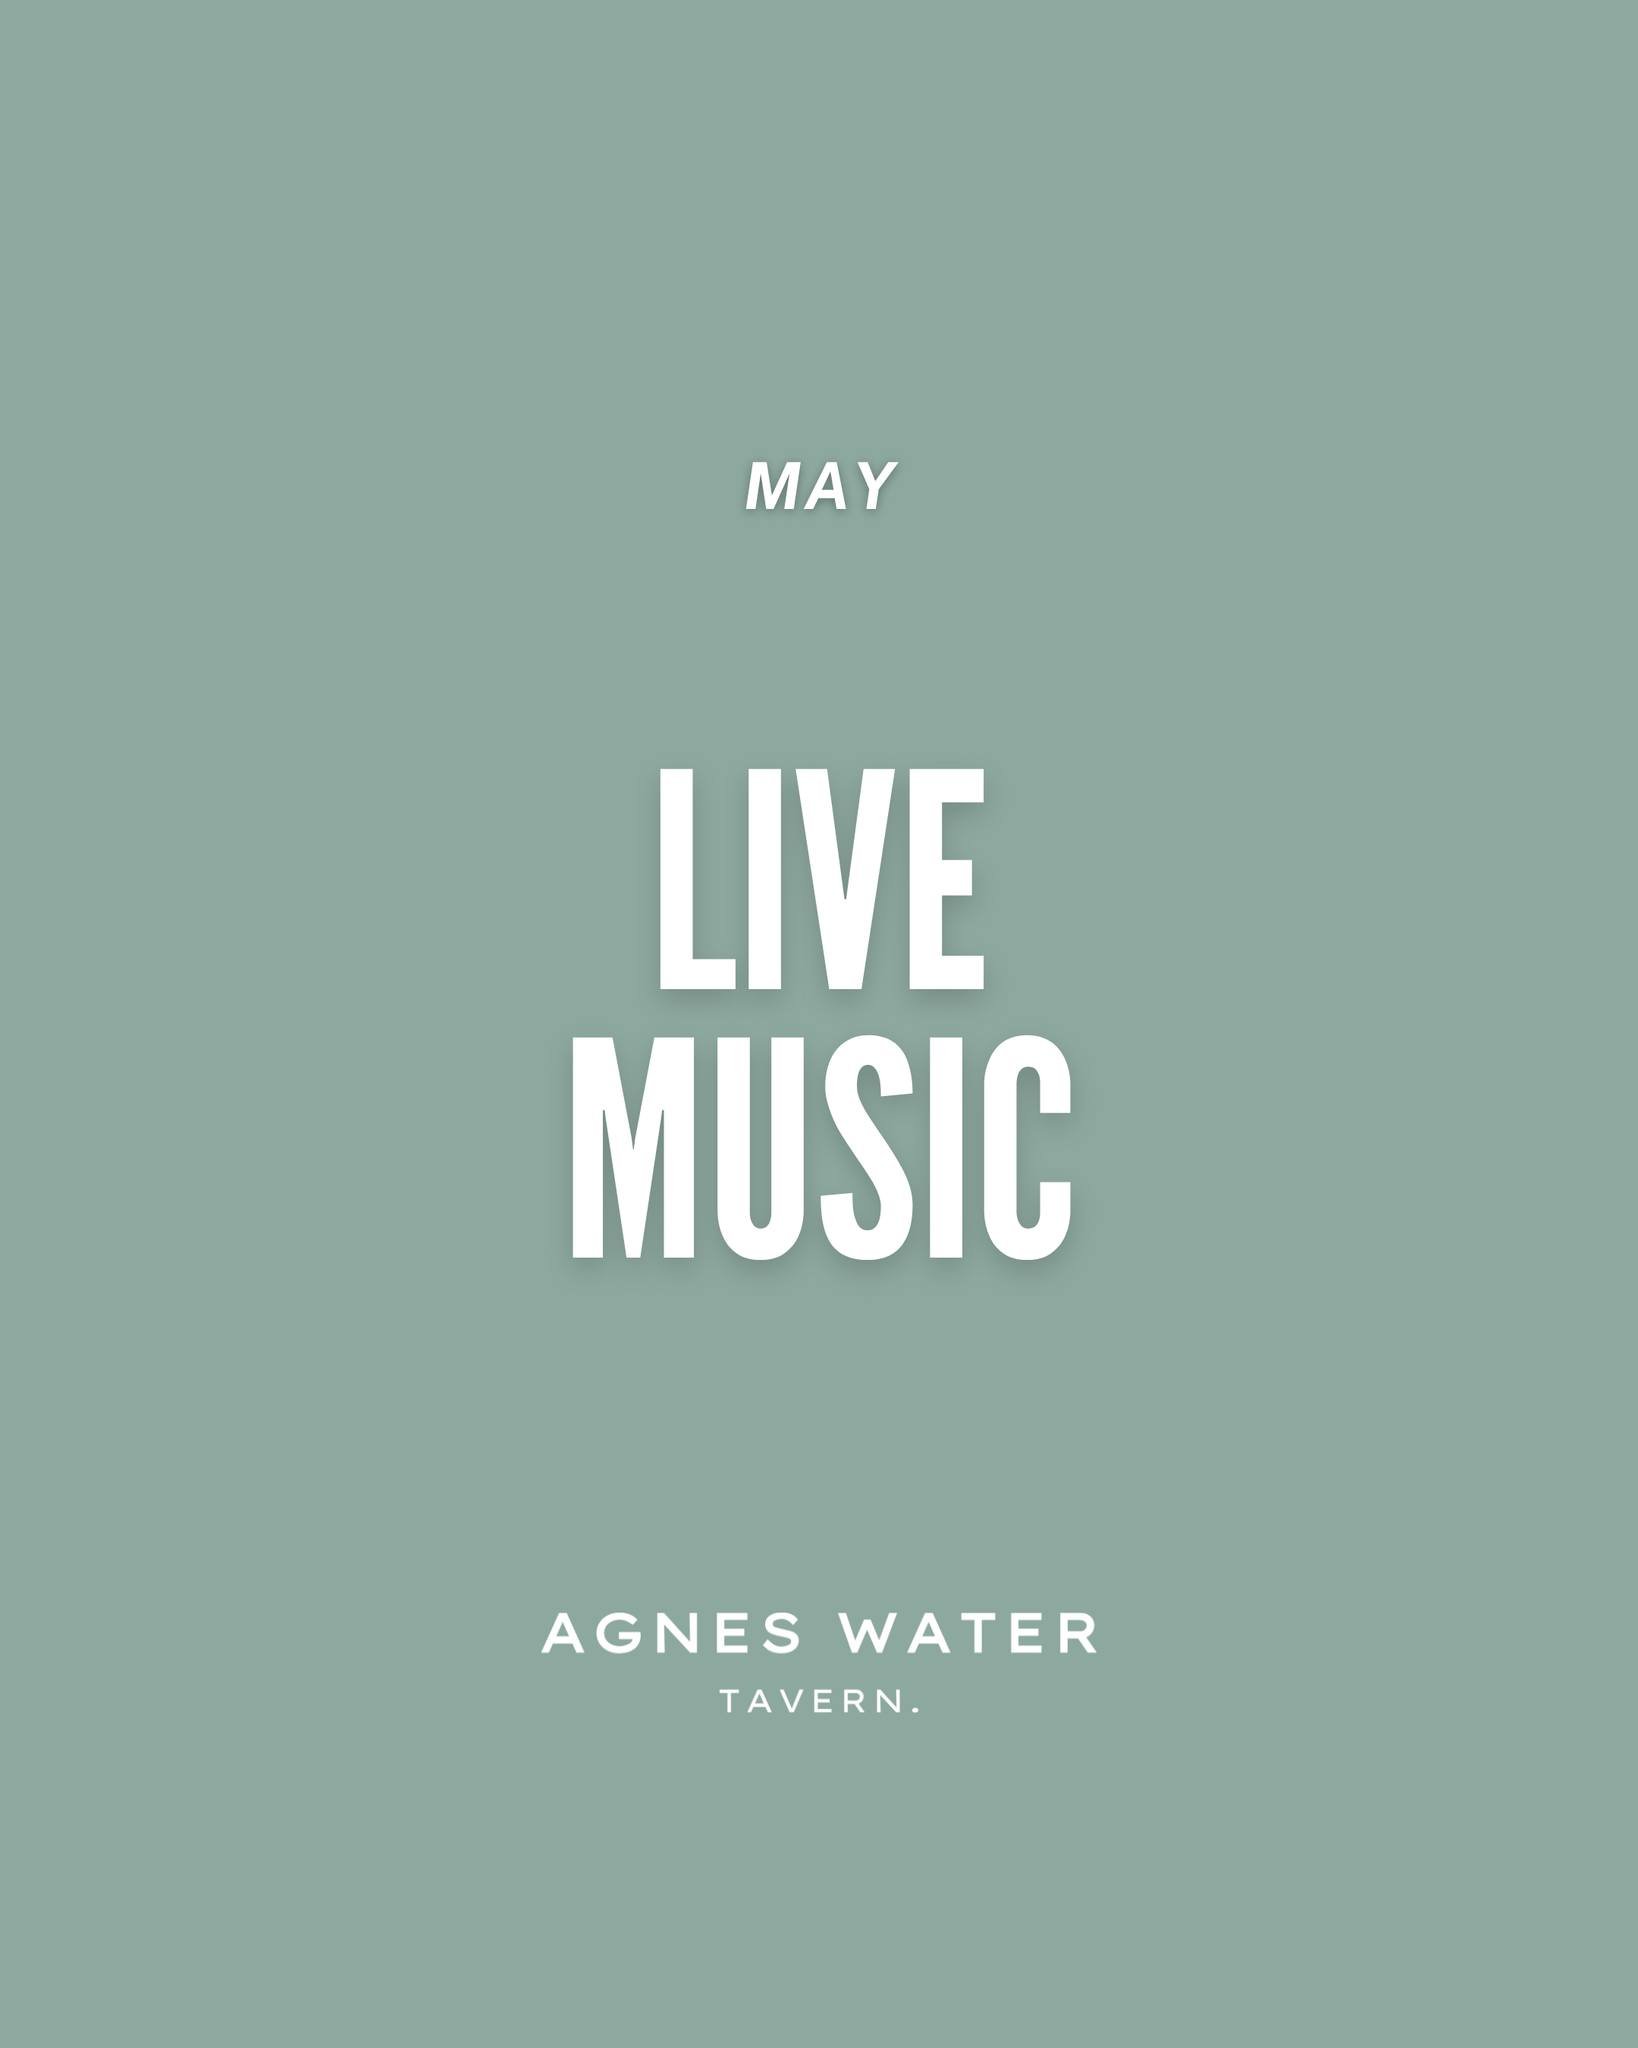 🎵 𝗚𝗲𝘁 𝗿𝗲𝗮𝗱𝘆, 𝗔𝗴𝗻𝗲𝘀 𝗪𝗮𝘁𝗲𝗿! 🎵

May is all set to be a month of unforgettable performances here at Agnes Water Tavern! 🎉

🗓️ 𝙃𝙚𝙧𝙚'𝙨 𝙖 𝙩𝙖𝙨𝙩𝙚 𝙤𝙛 𝙬𝙝𝙖𝙩'𝙨 𝙩𝙤 𝙘𝙤𝙢𝙚:
🎤 3rd May: 8pm - Esko Scott ⚡️ KARAOKE 
🎤 4th 